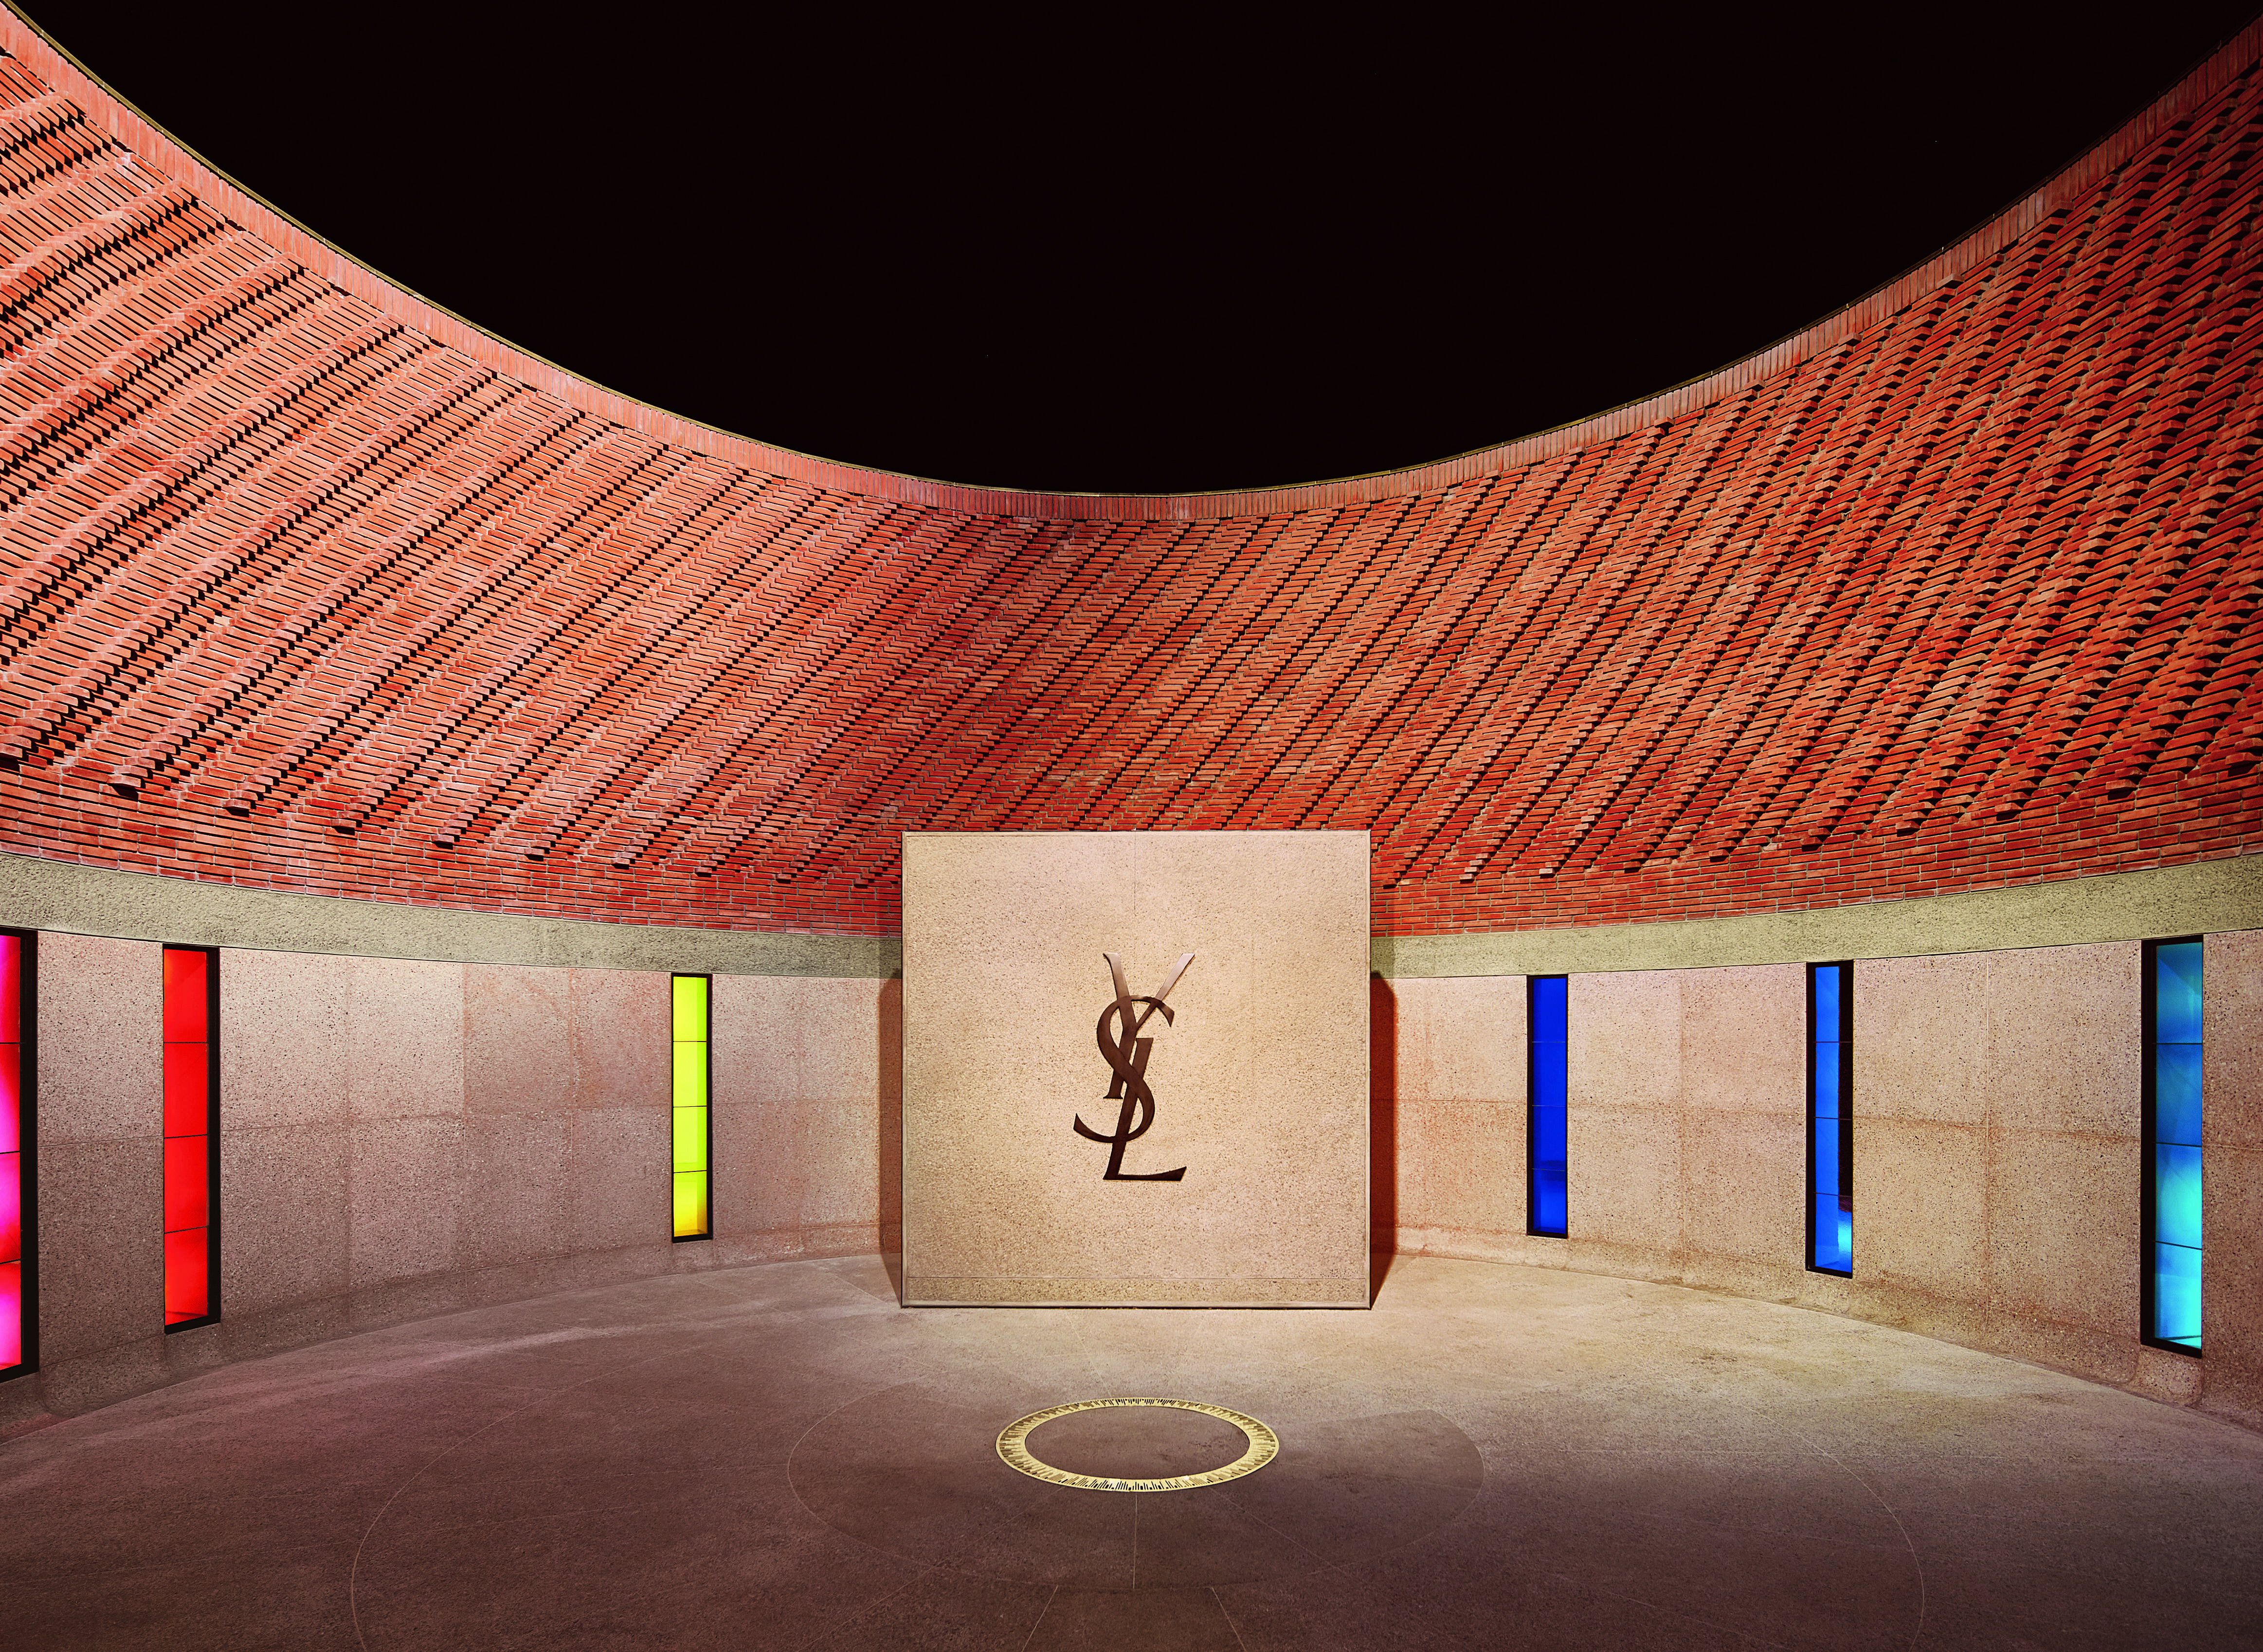 All you need to know about Yves Saint Laurent Museum Marrakech